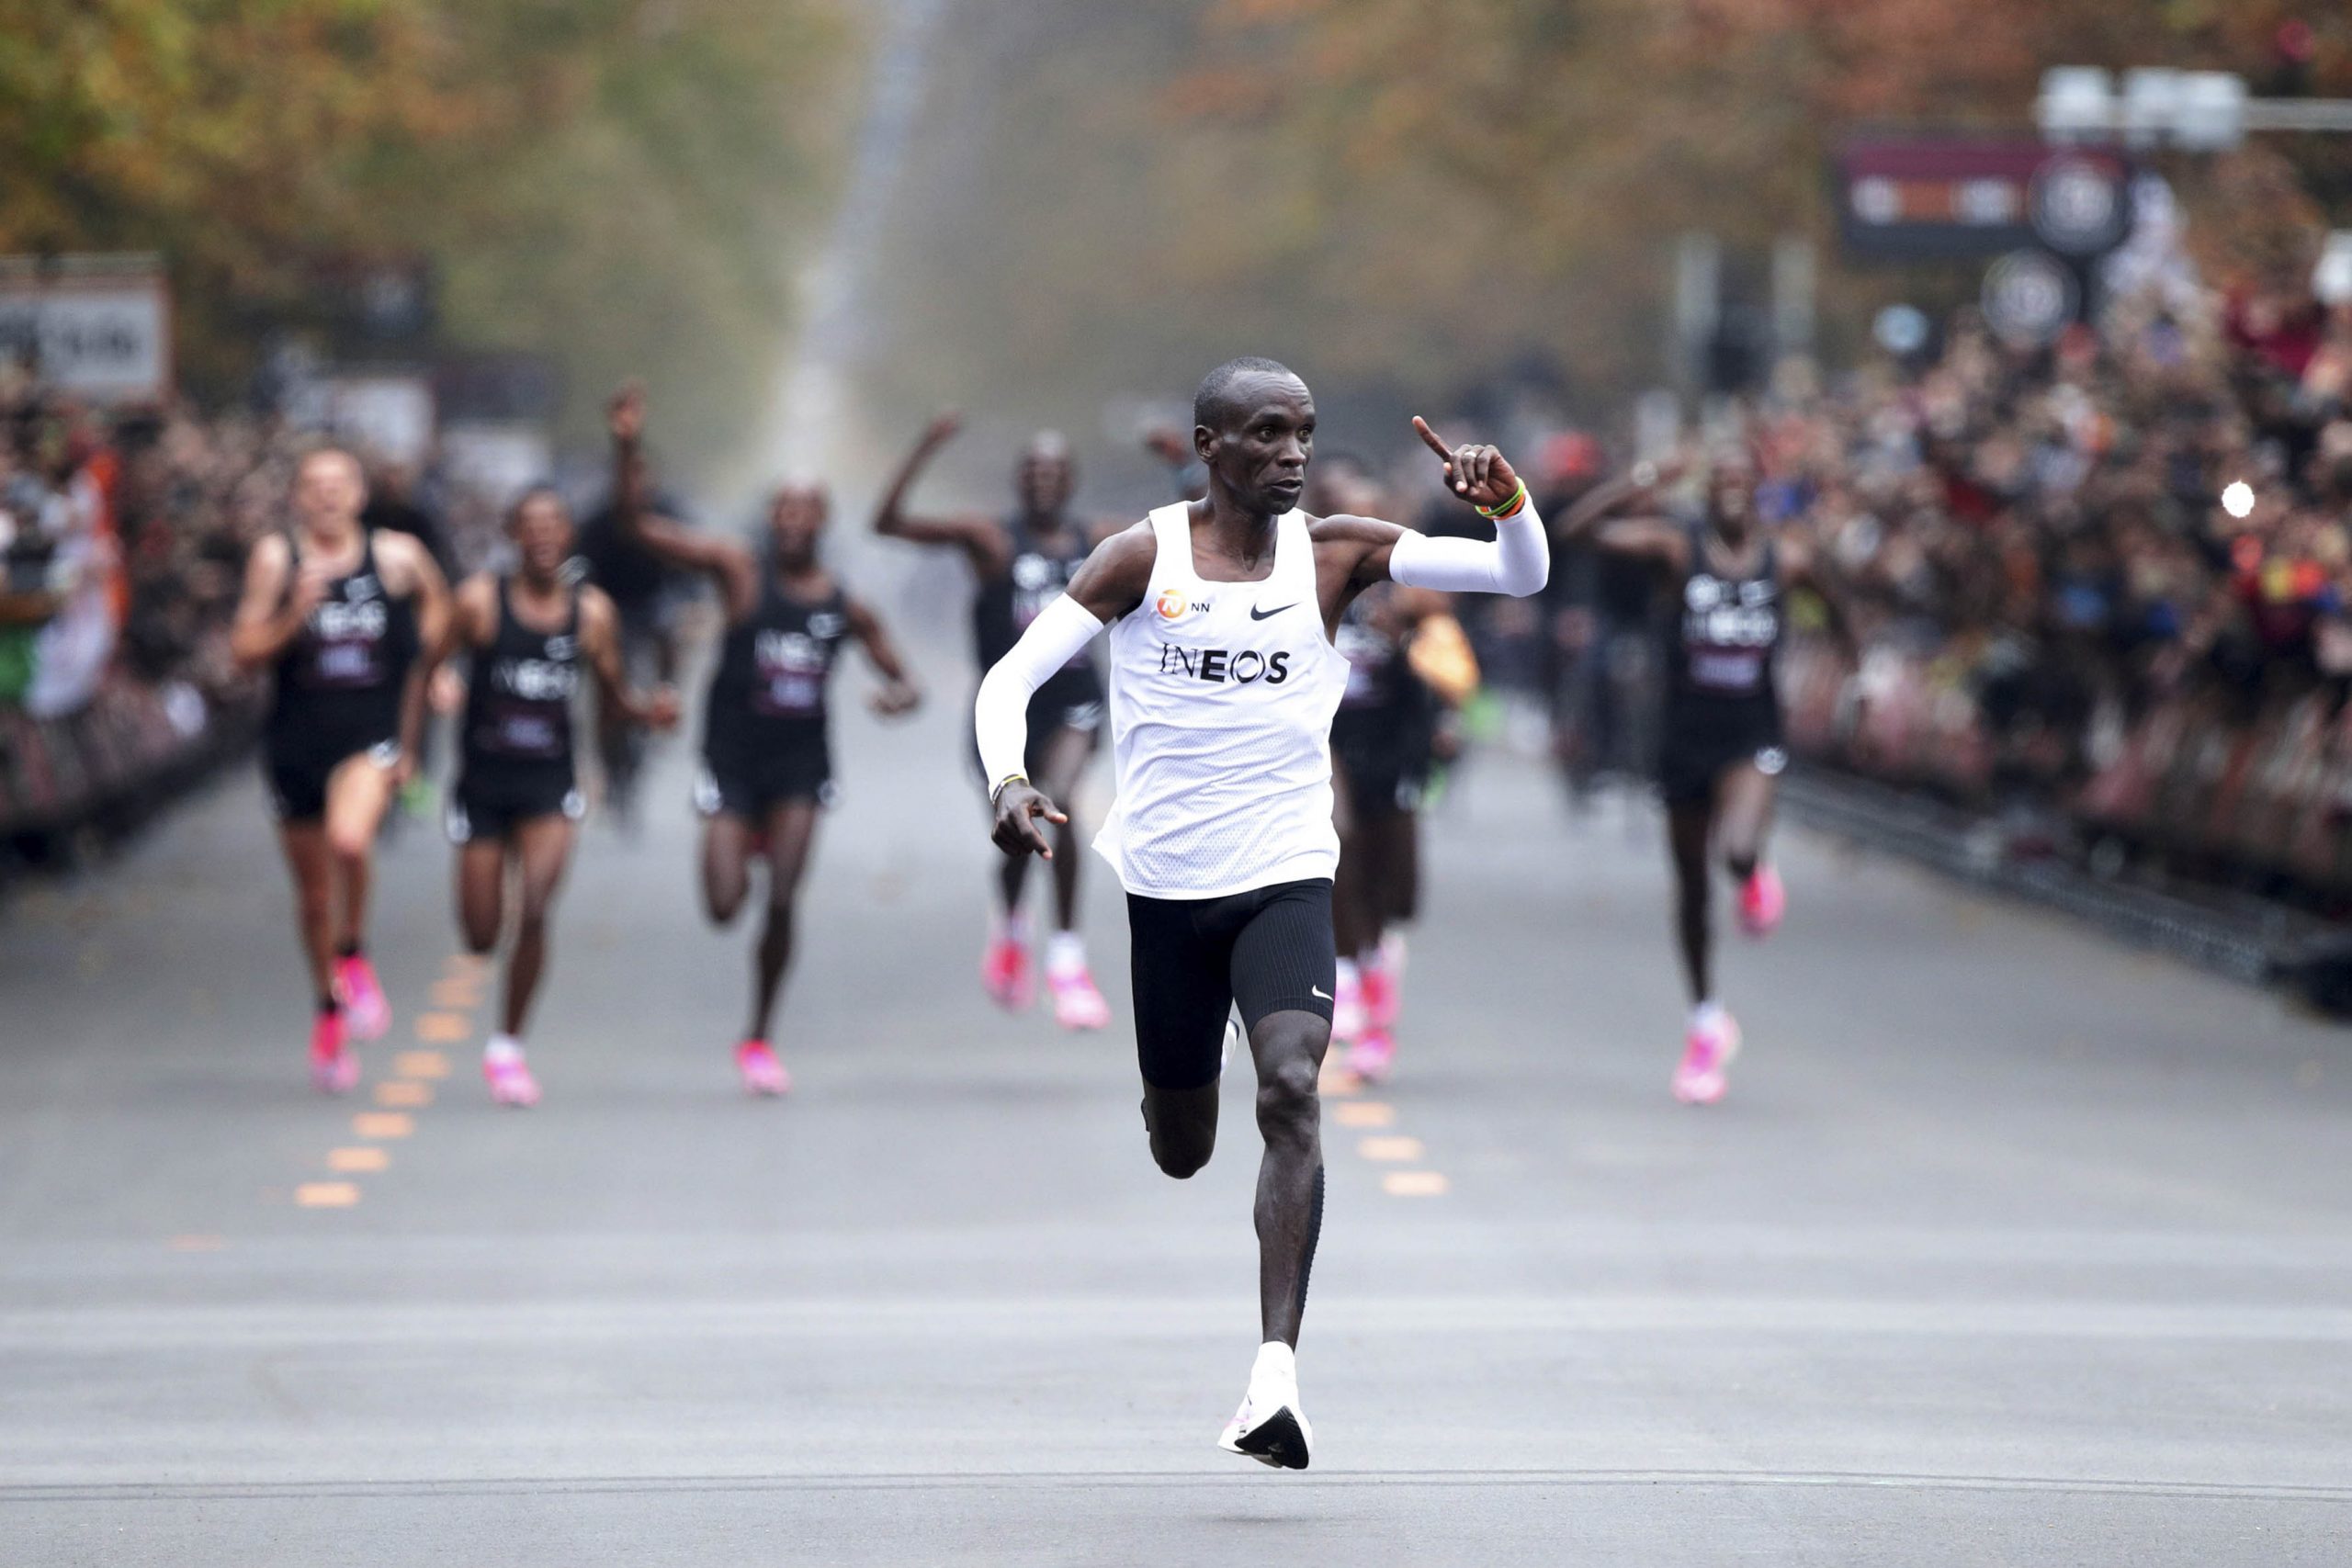 Kenya's Eliud Kipchoge, the marathon world record holder, celebrates as he successfully completes his attempt to run a marathon in under two hours in Vienna, Austria, October 12, 2019. REUTERS/Lisi Niesner